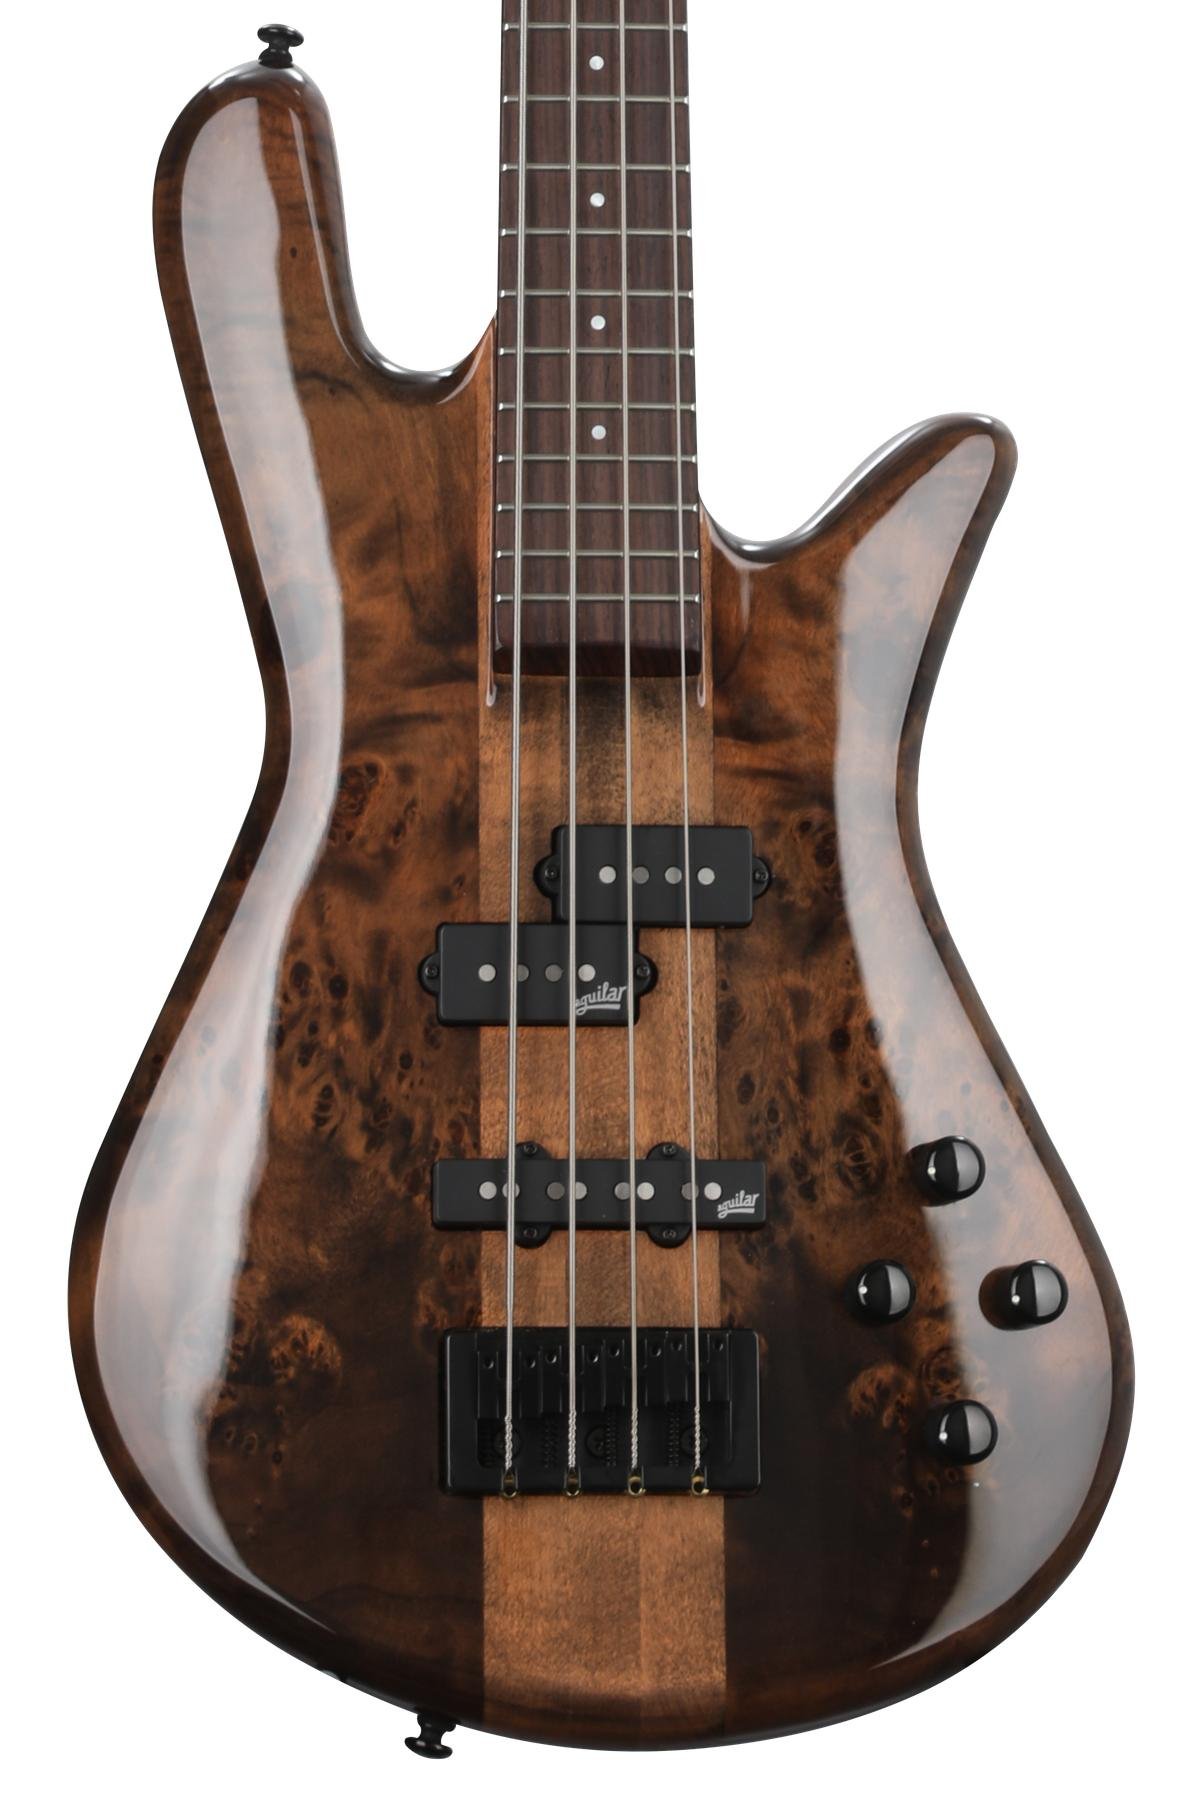 Spector NS Ethos 4 Bass Guitar - Super Faded Black Gloss | Sweetwater